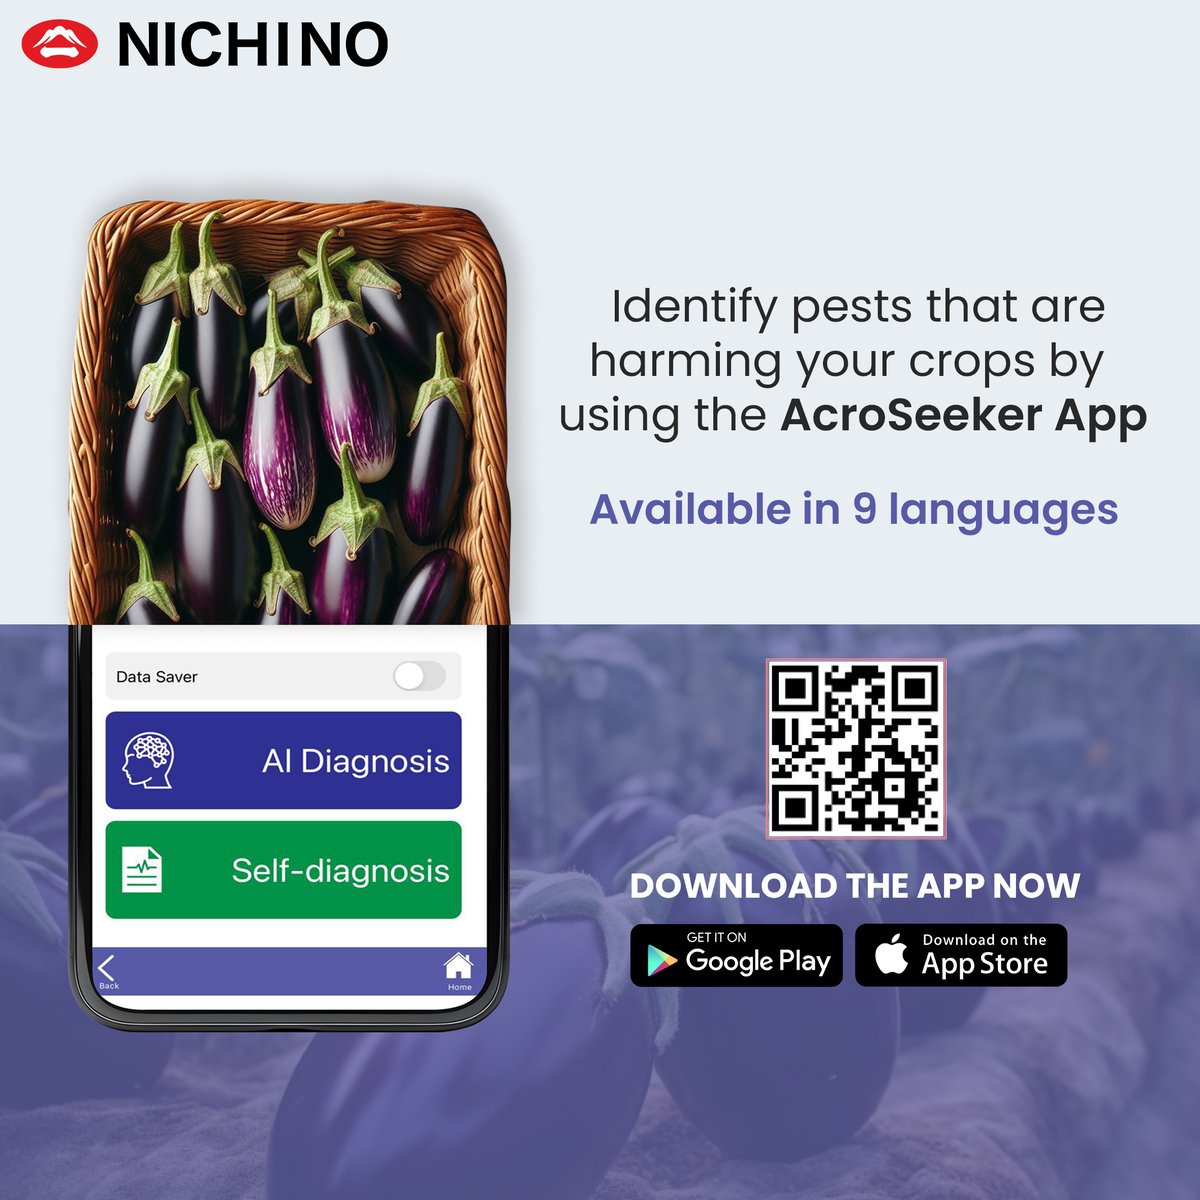 A proper identified and diagnosed crop yields the best quality!

#brinjal #pest #farming #aidiagnosis #agriculture #quality #crop #nichinoindia